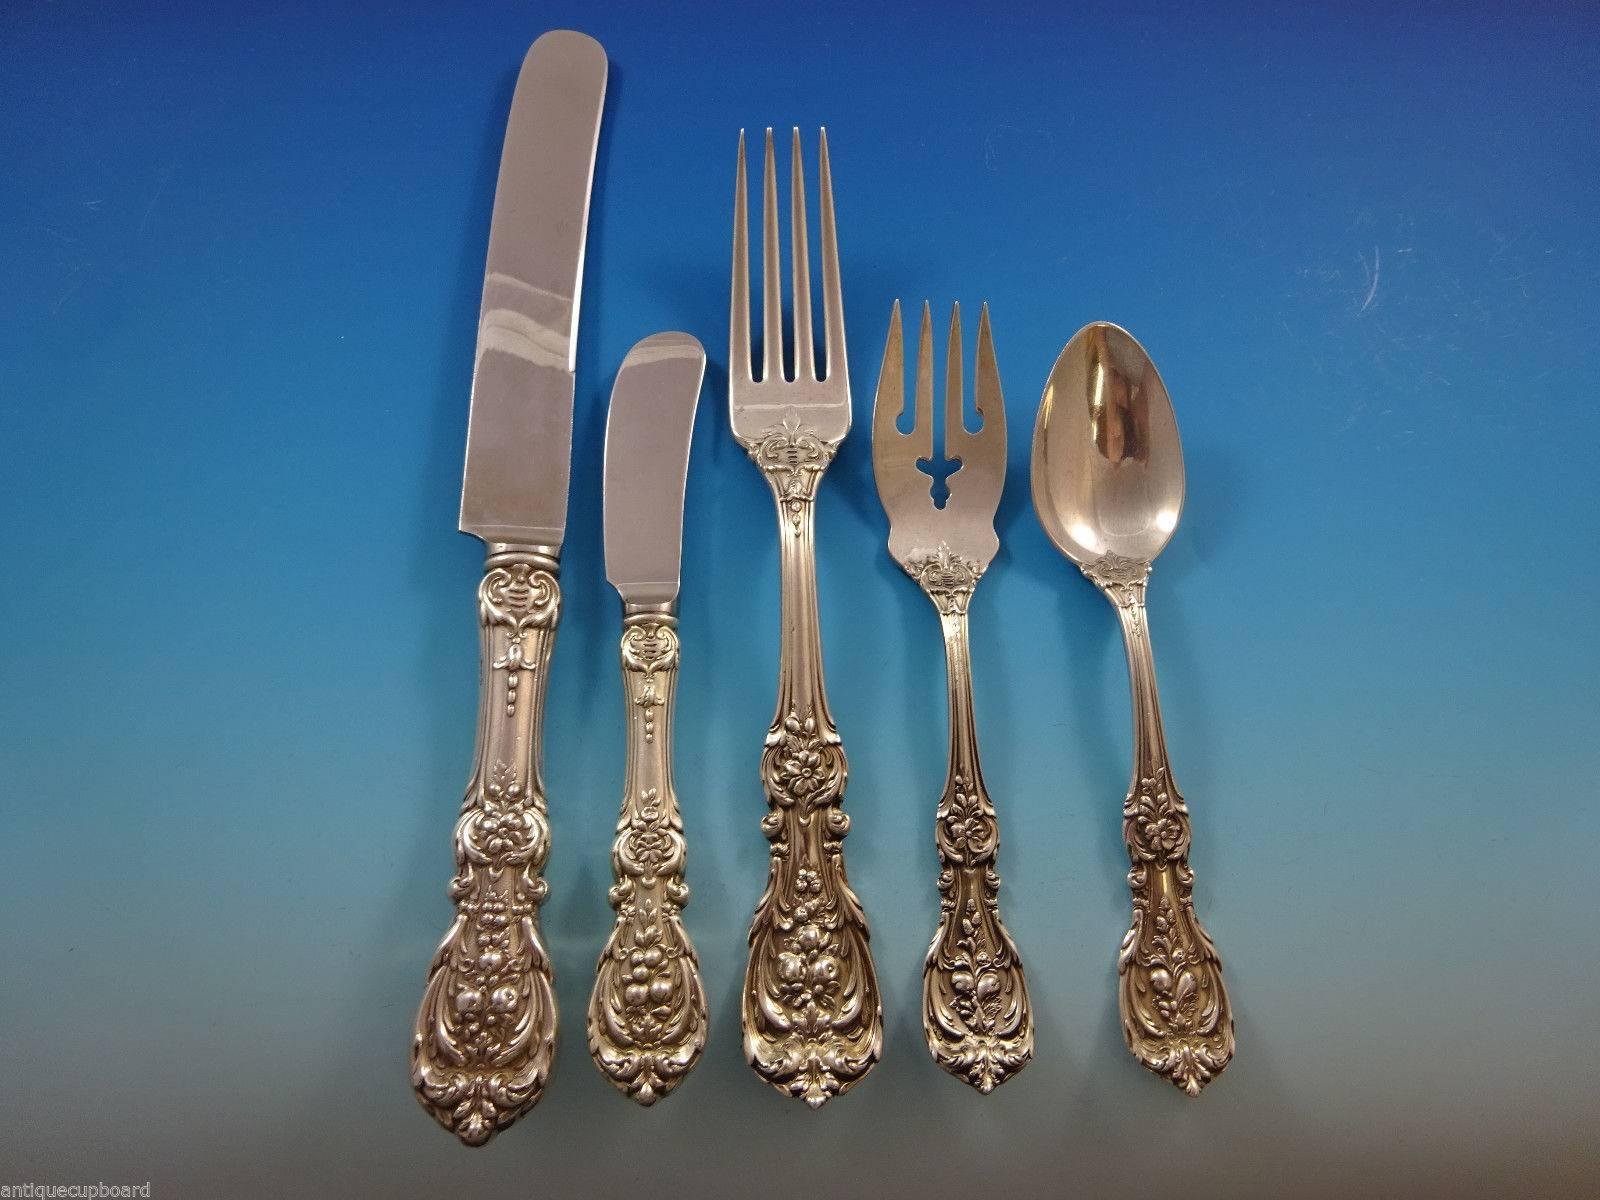 Often called America's most glorious sterling silver flatware pattern, Francis I is a true work of art. Each piece's central decoration represents a different cluster of fruit and flowers, giving your table a unique and Classic presentation. This is